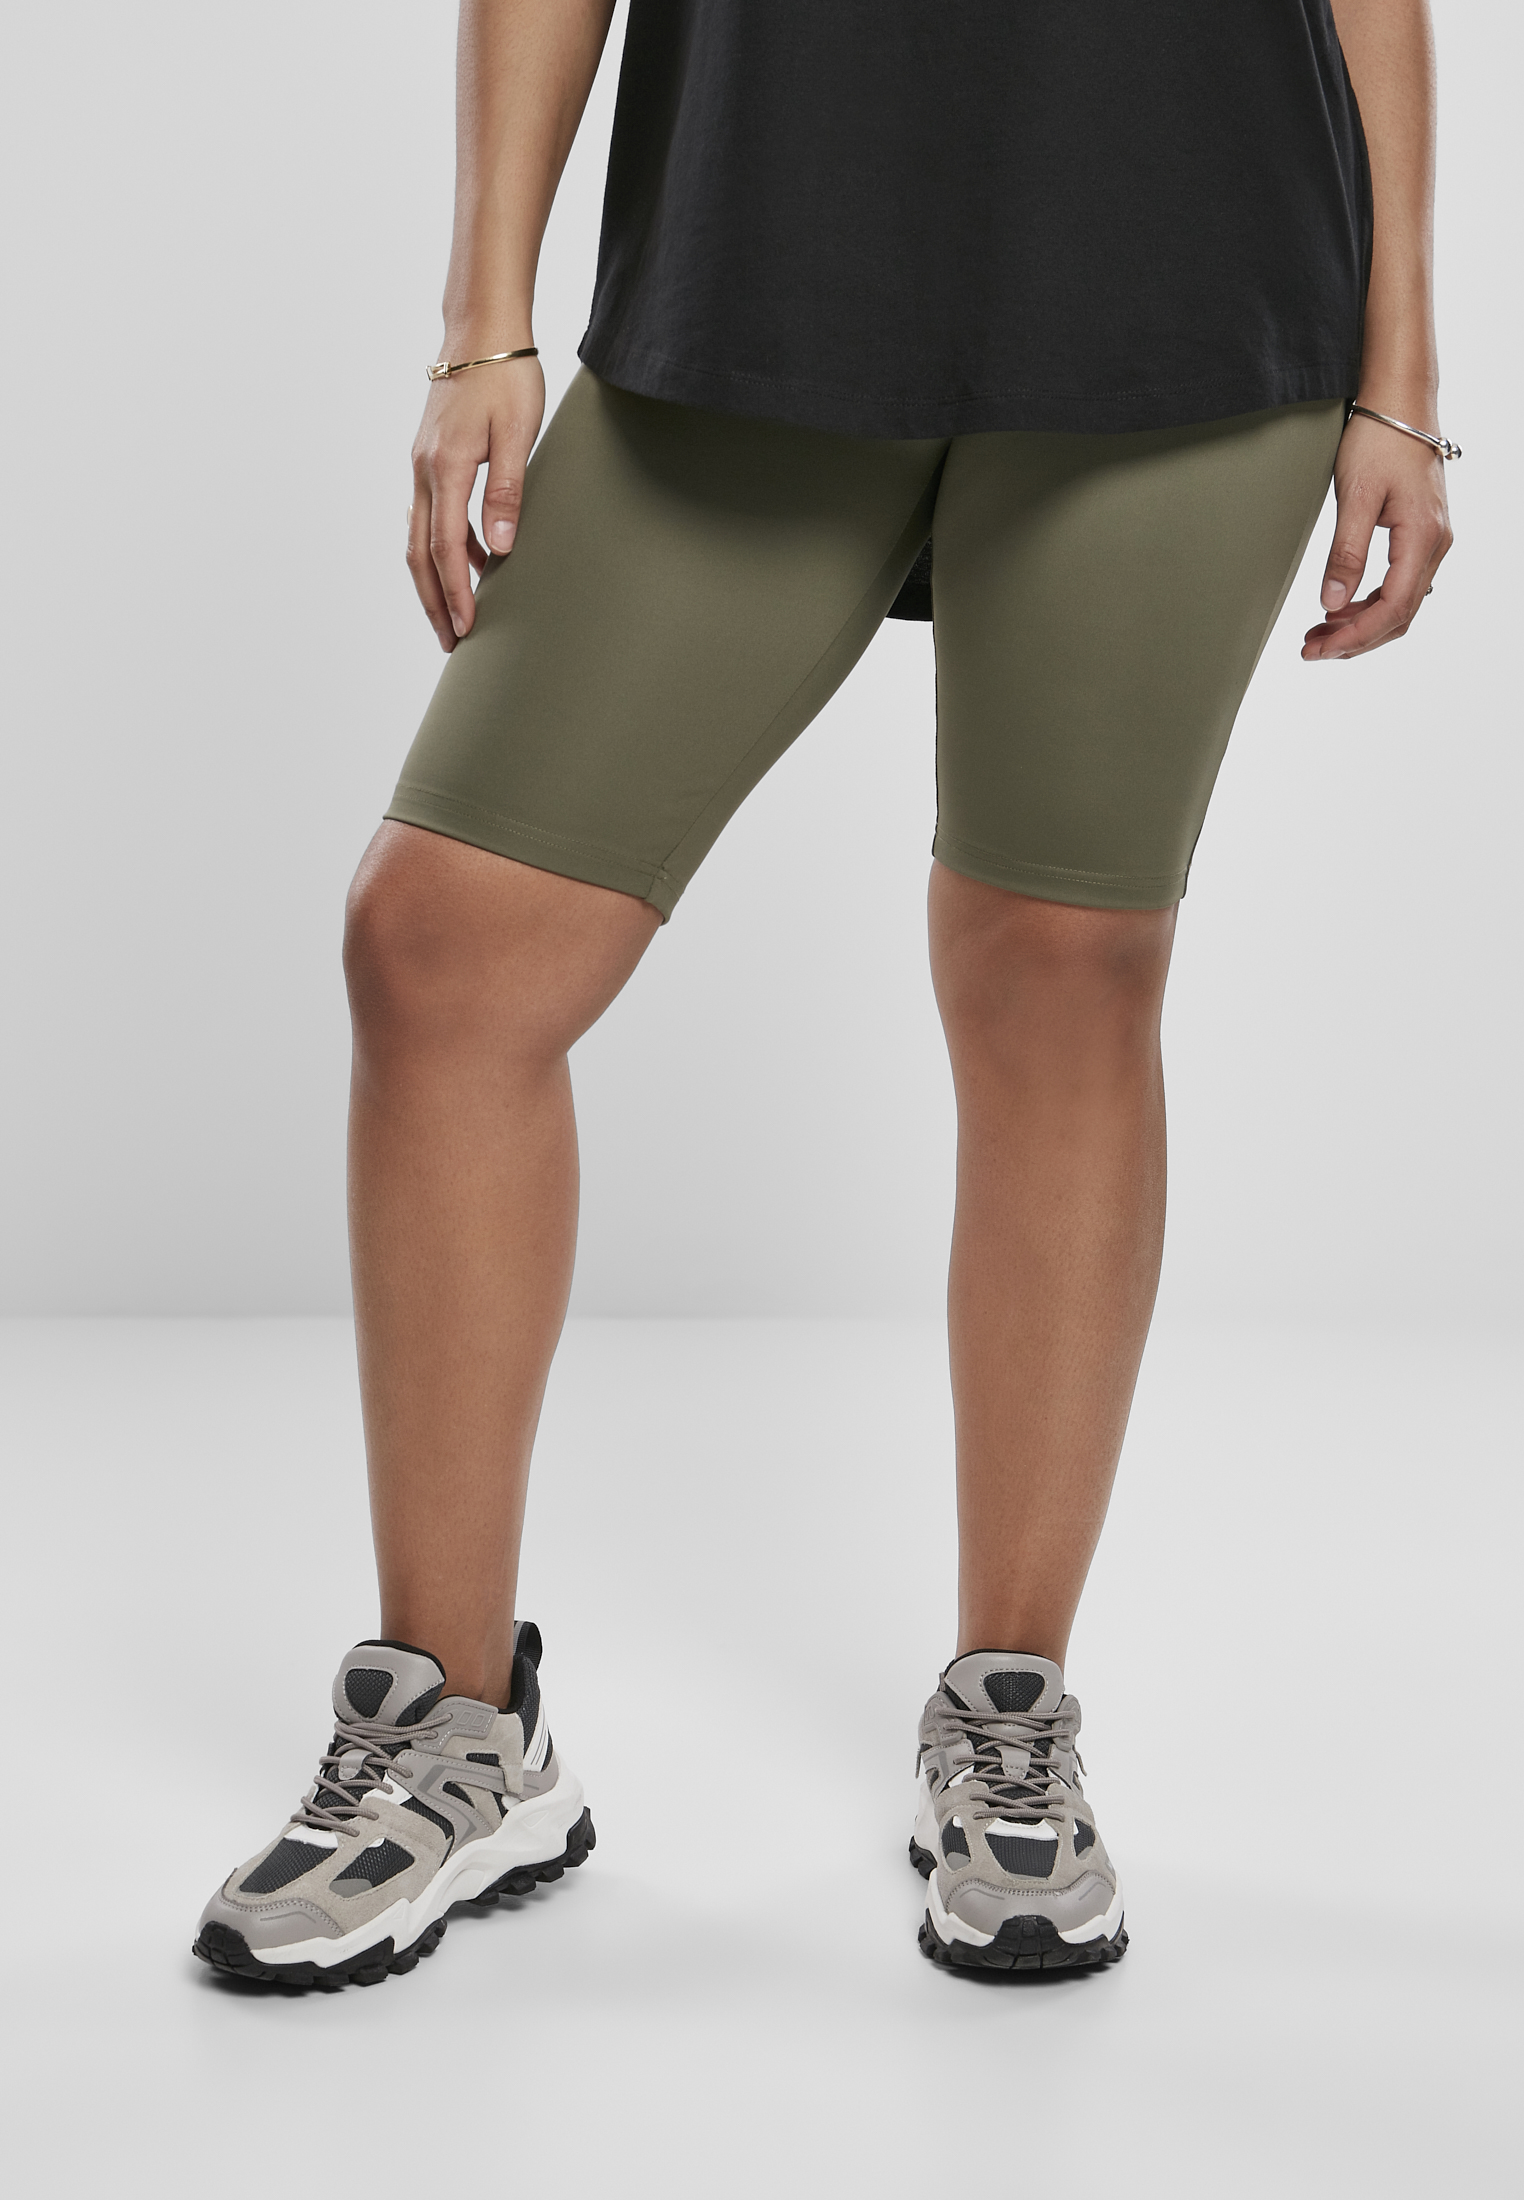 Bekleidung Ladies High Waist Camo Tech Cycle Shorts Double Pack in Farbe brick camo/olive